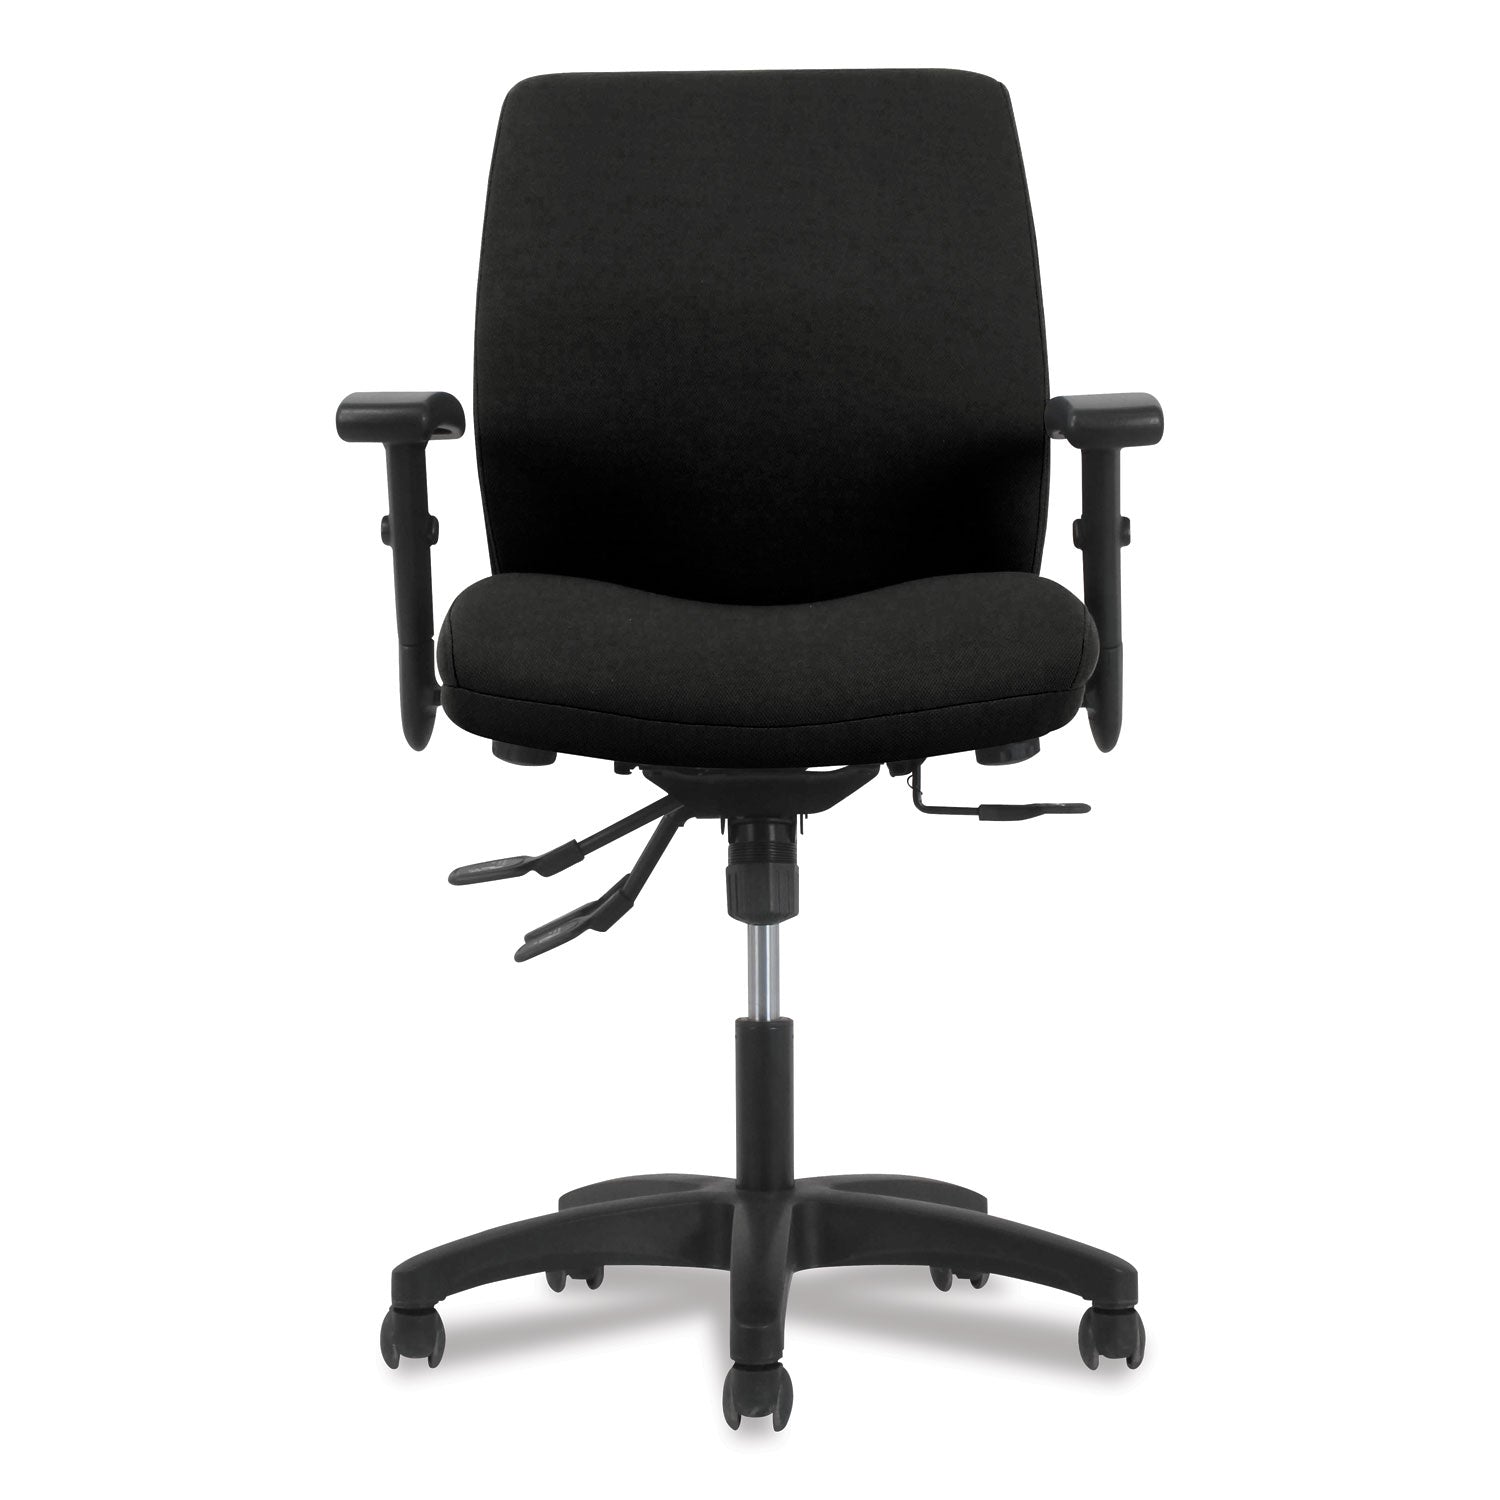 network-mid-back-task-chair-supports-up-to-250-lb-183-to-228-seat-height-black_honvl282a2va10t - 2